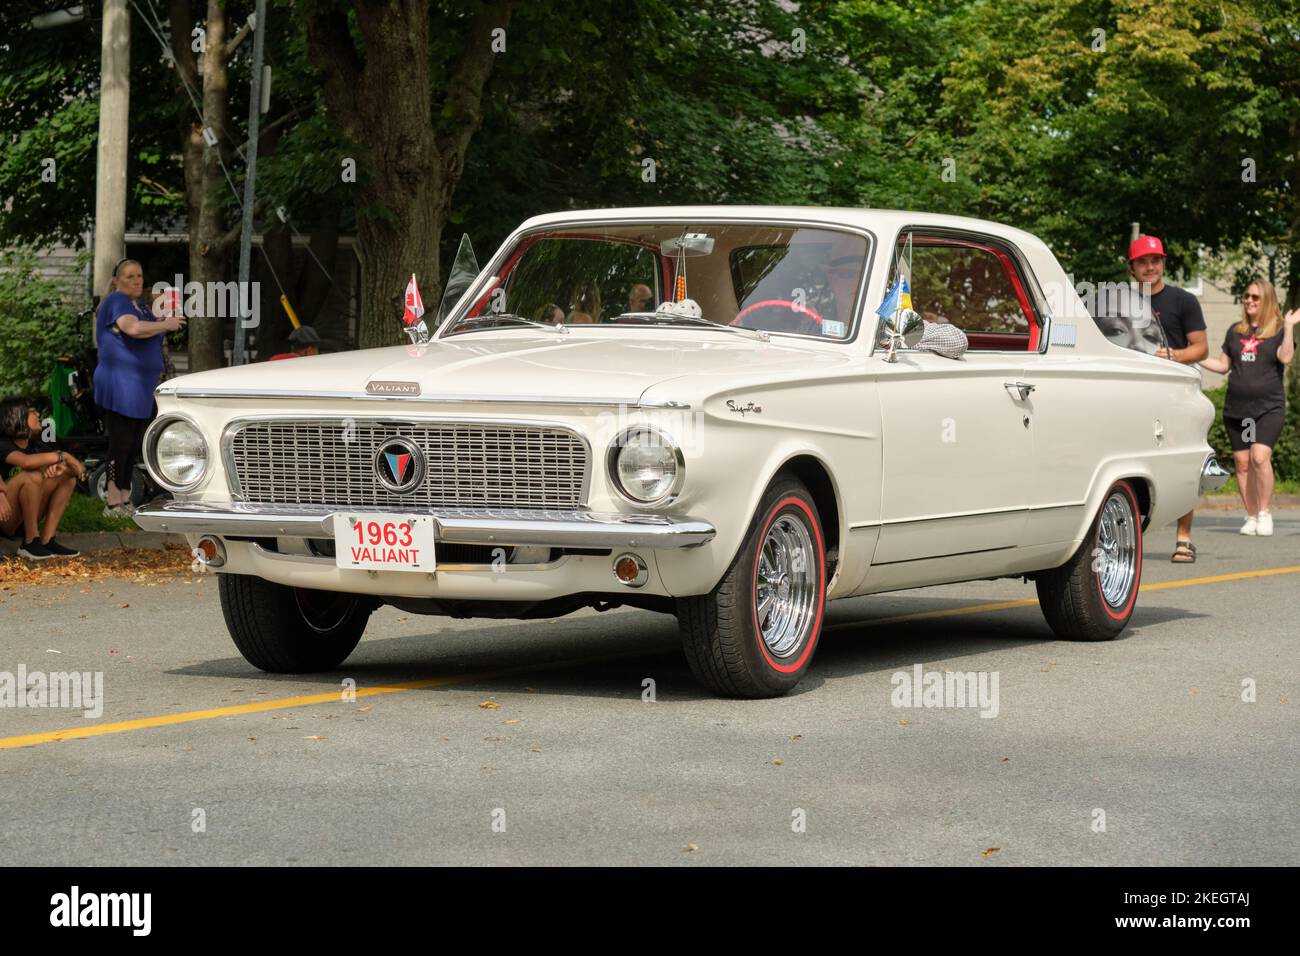 Vintage Plymouth Valiant car 1963 Banque D'Images